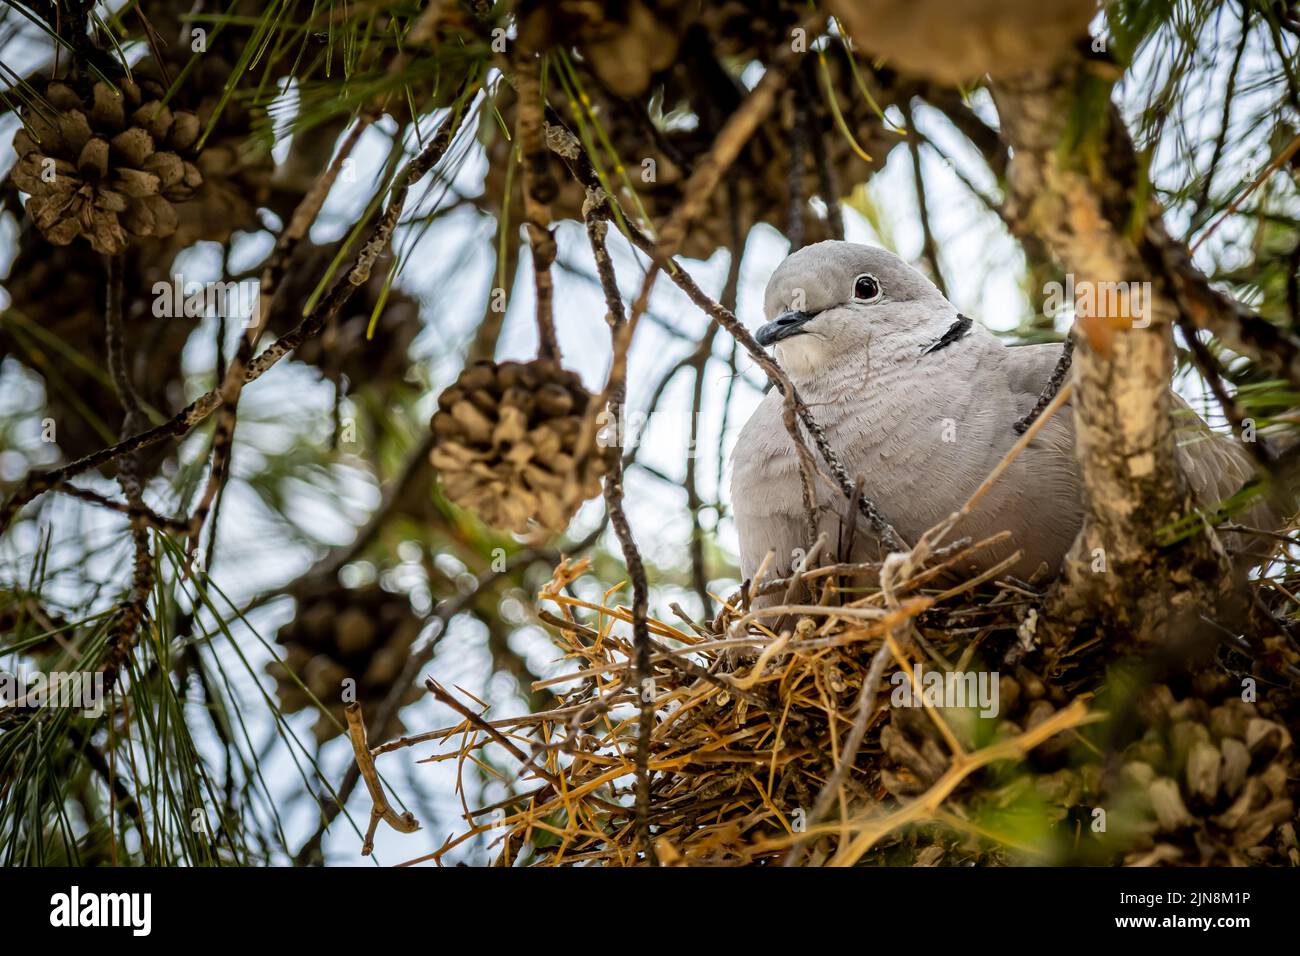 Closeup side view from below of a fluffed up female gray pigeon sitting on its flimsy nest to protect its breed in the shadow of a pine tree. Stock Photo